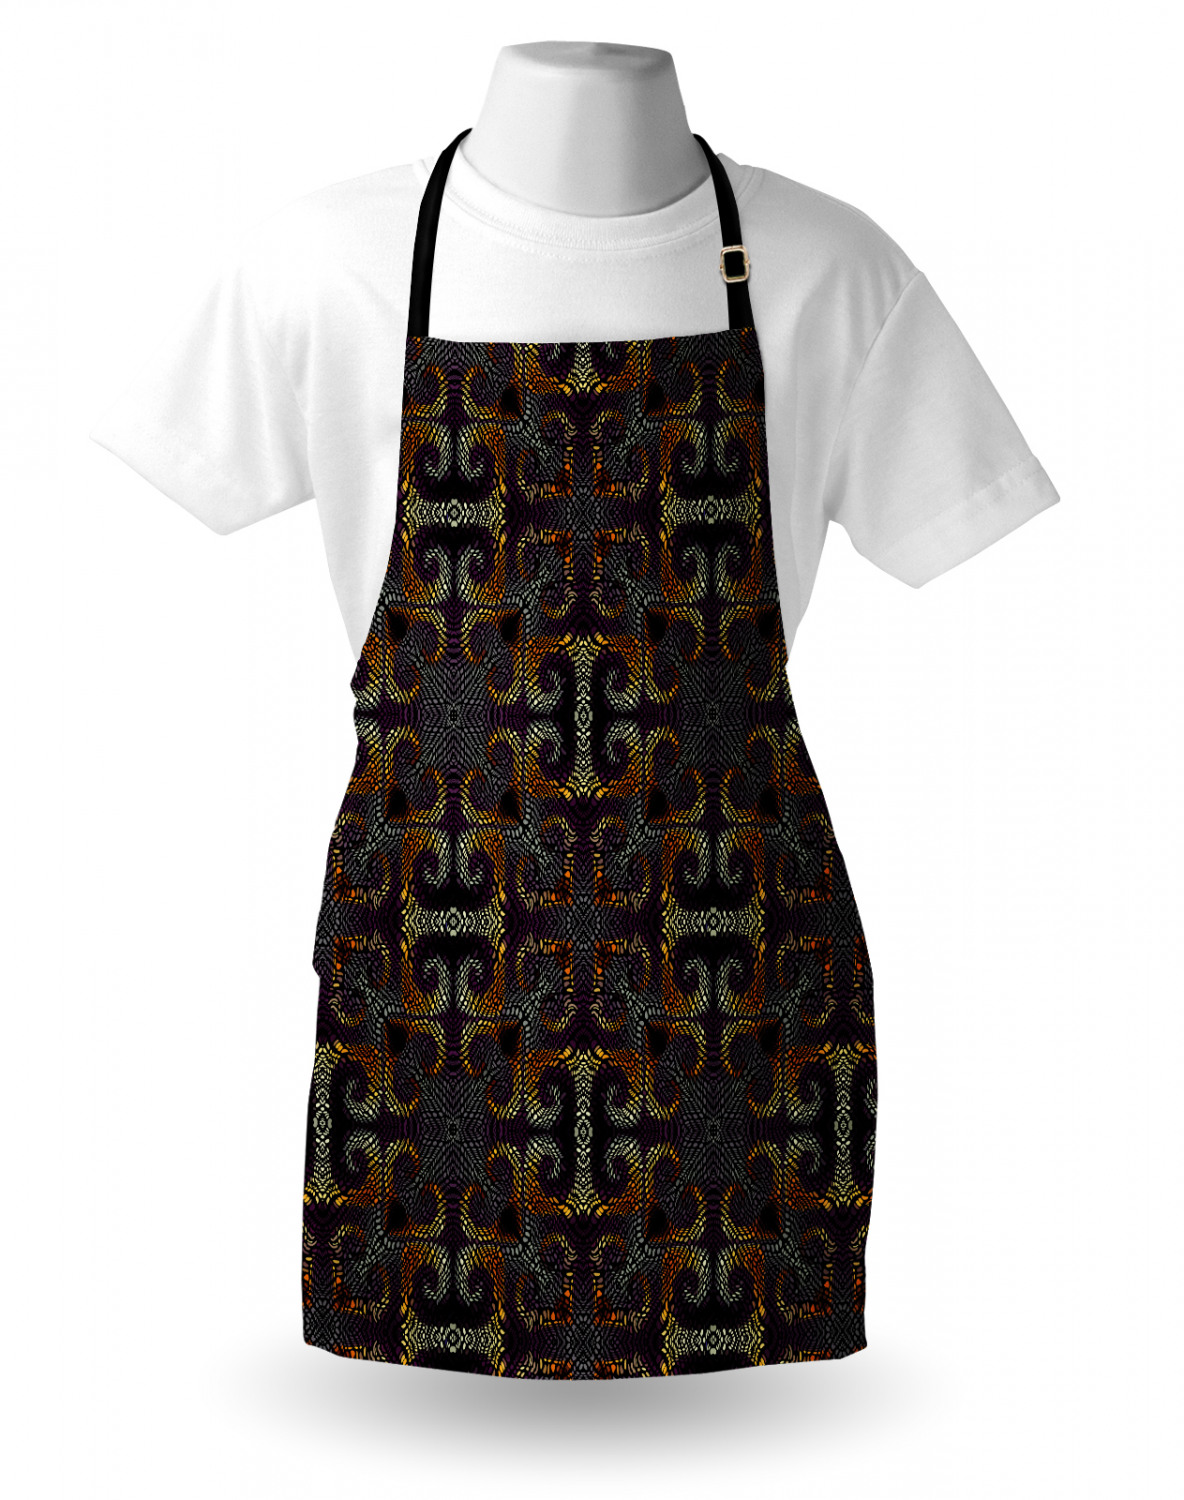 Abstract Apron, Irregular Curved and Mosaic Inspired Motifs Continuing Ornamental Elements, Unisex Kitchen Bib with Adjustable Neck for Cooking Gardening, Adult Size, Multicolor, by Ambesonne - image 4 of 4